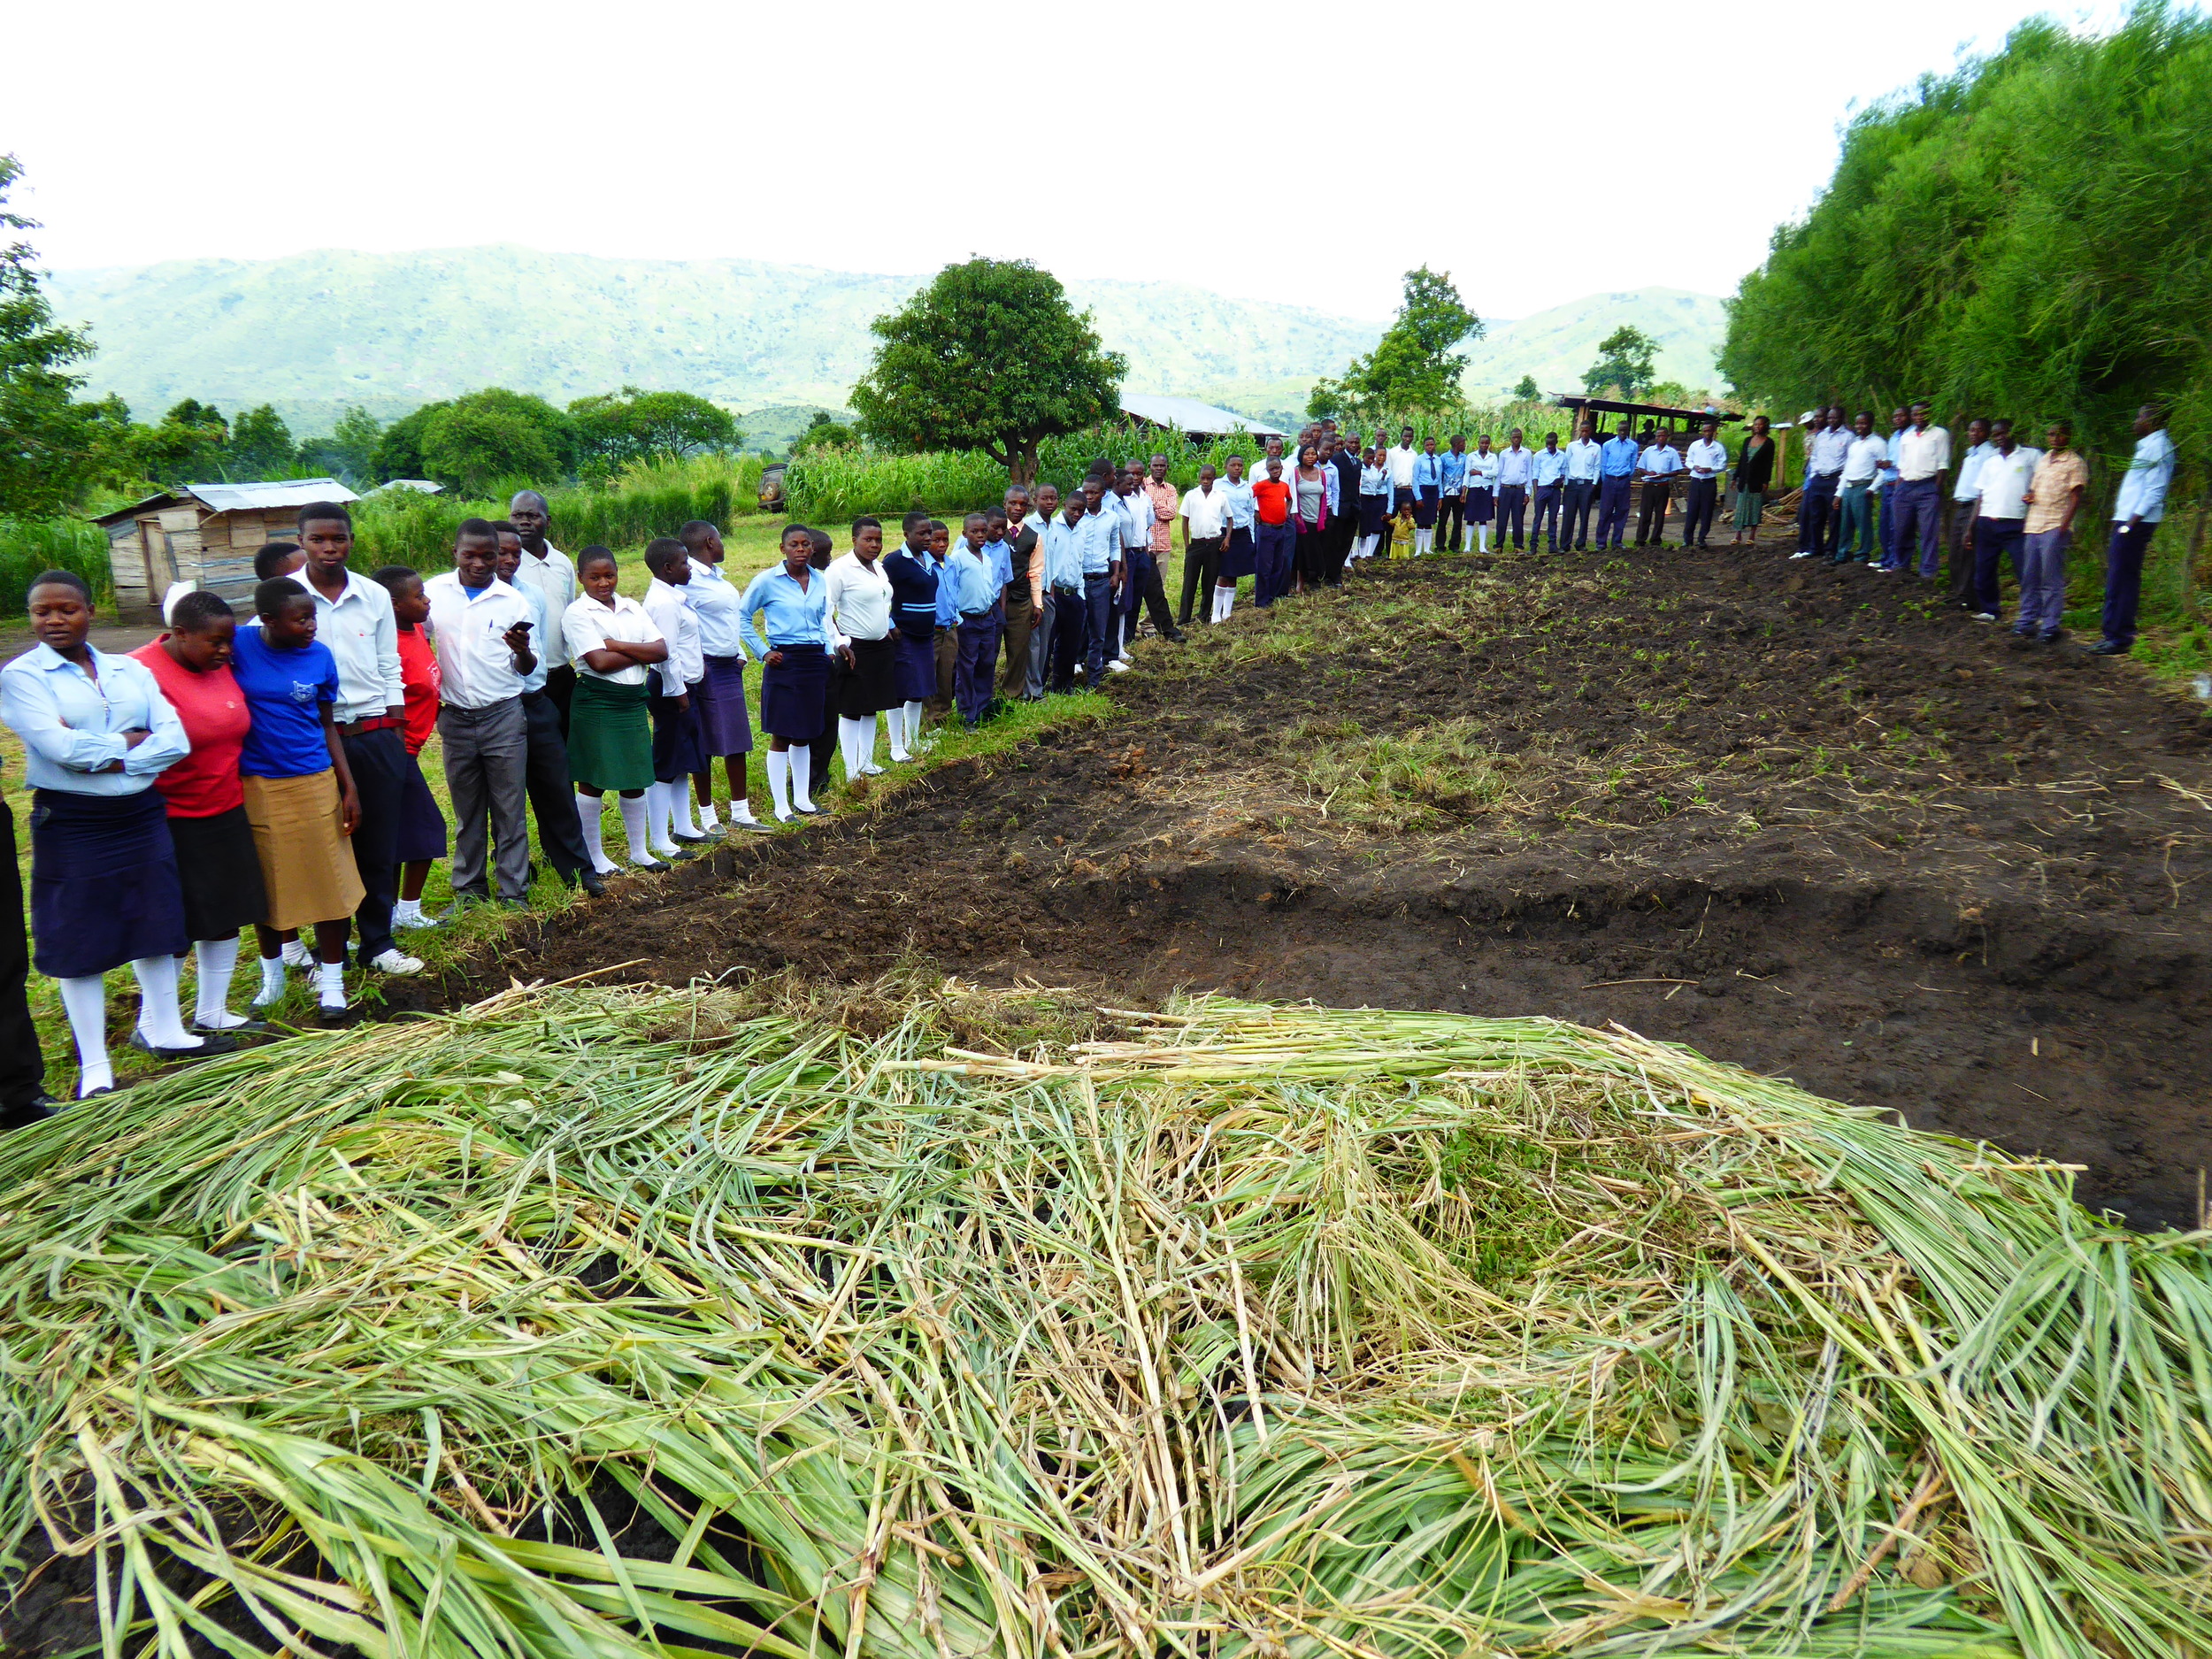 Students standing around land where permanent classrooms will be built